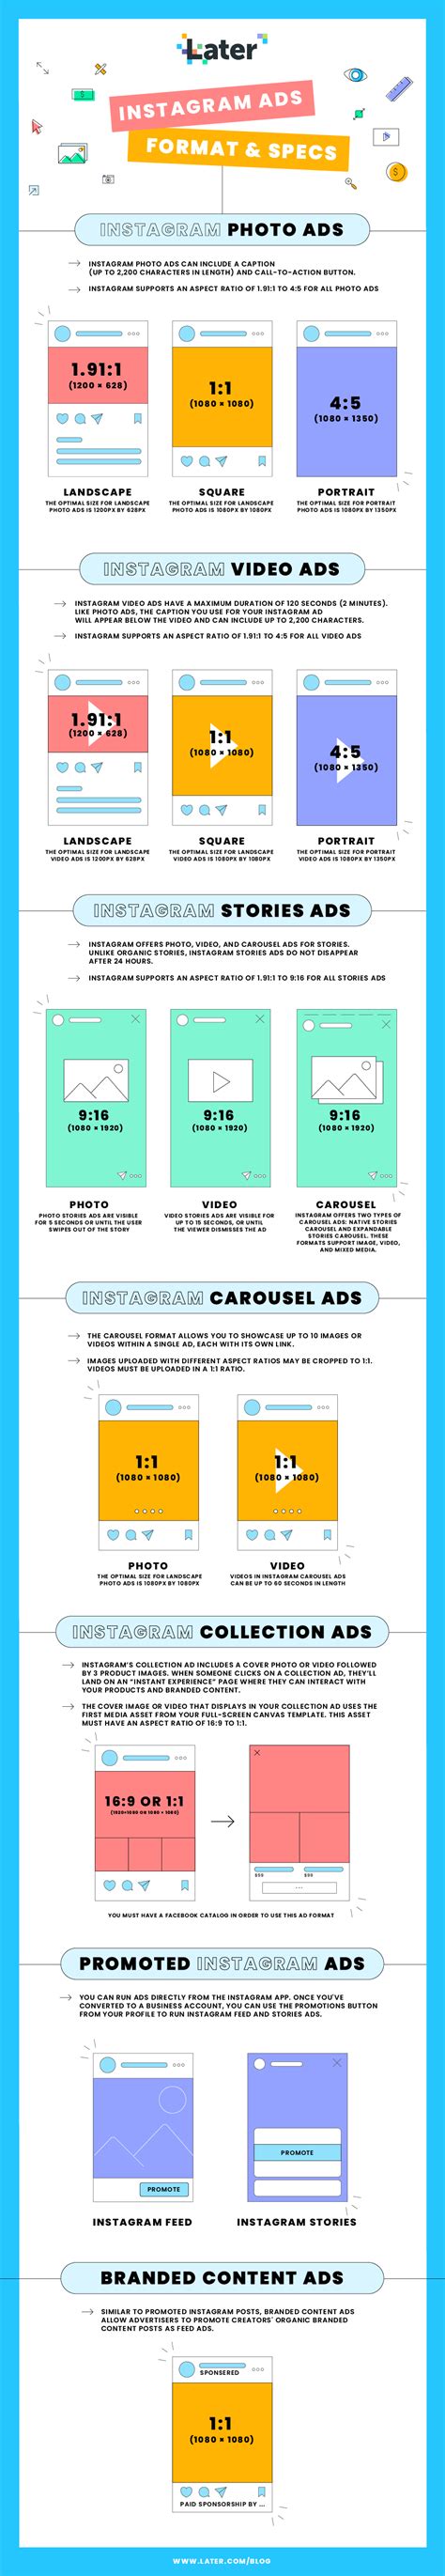 The Ultimate Instagram Ad Cheat Sheet For Businesses Infographic